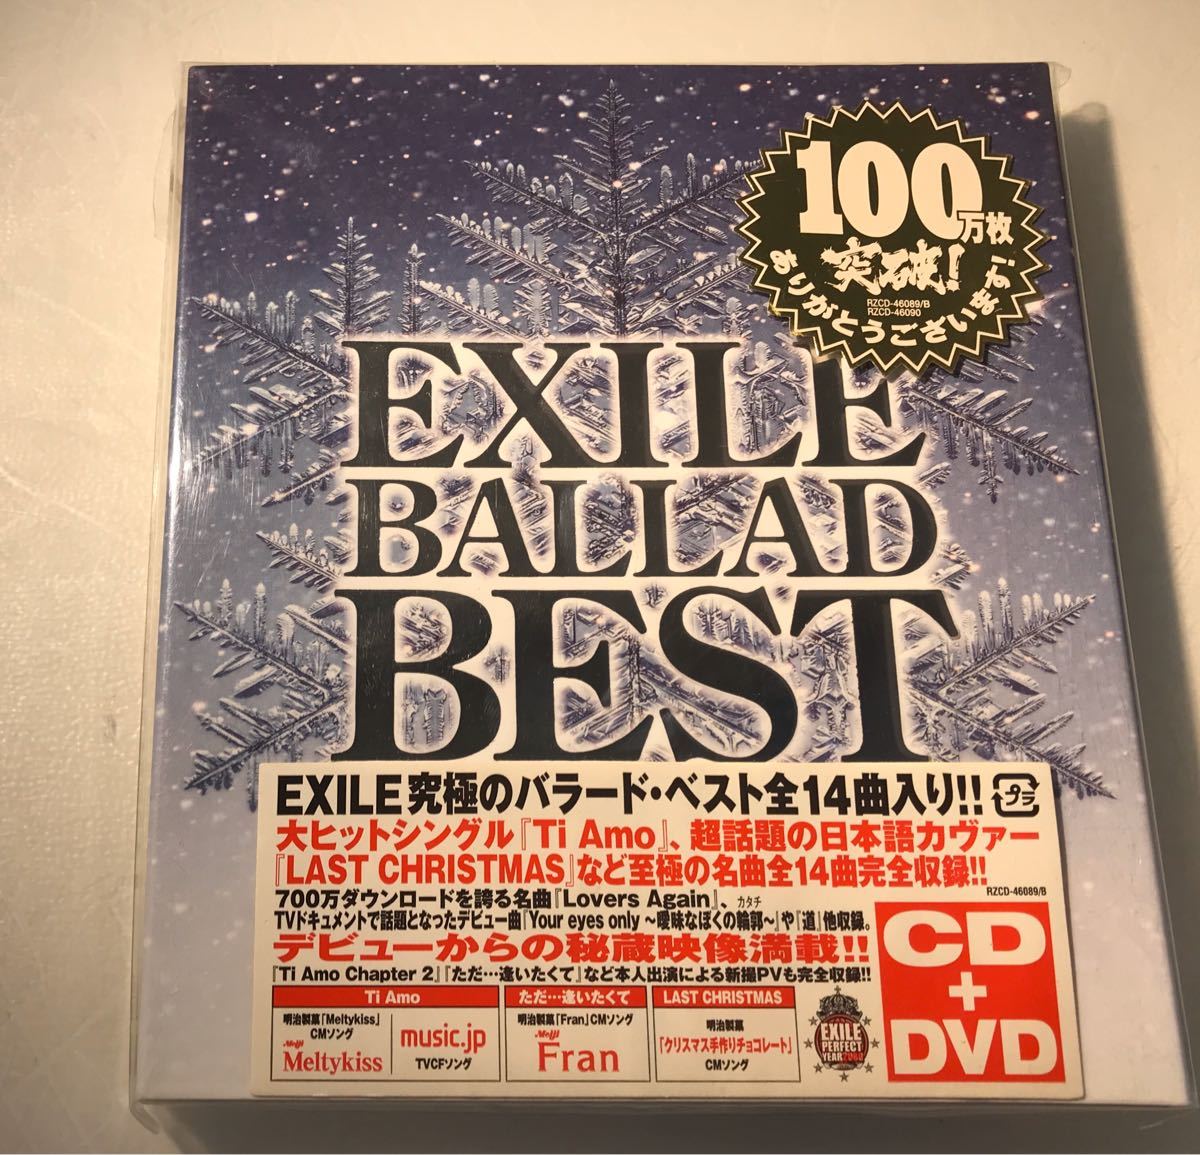 Paypayフリマ Exile Ballad Best Cd Dvd